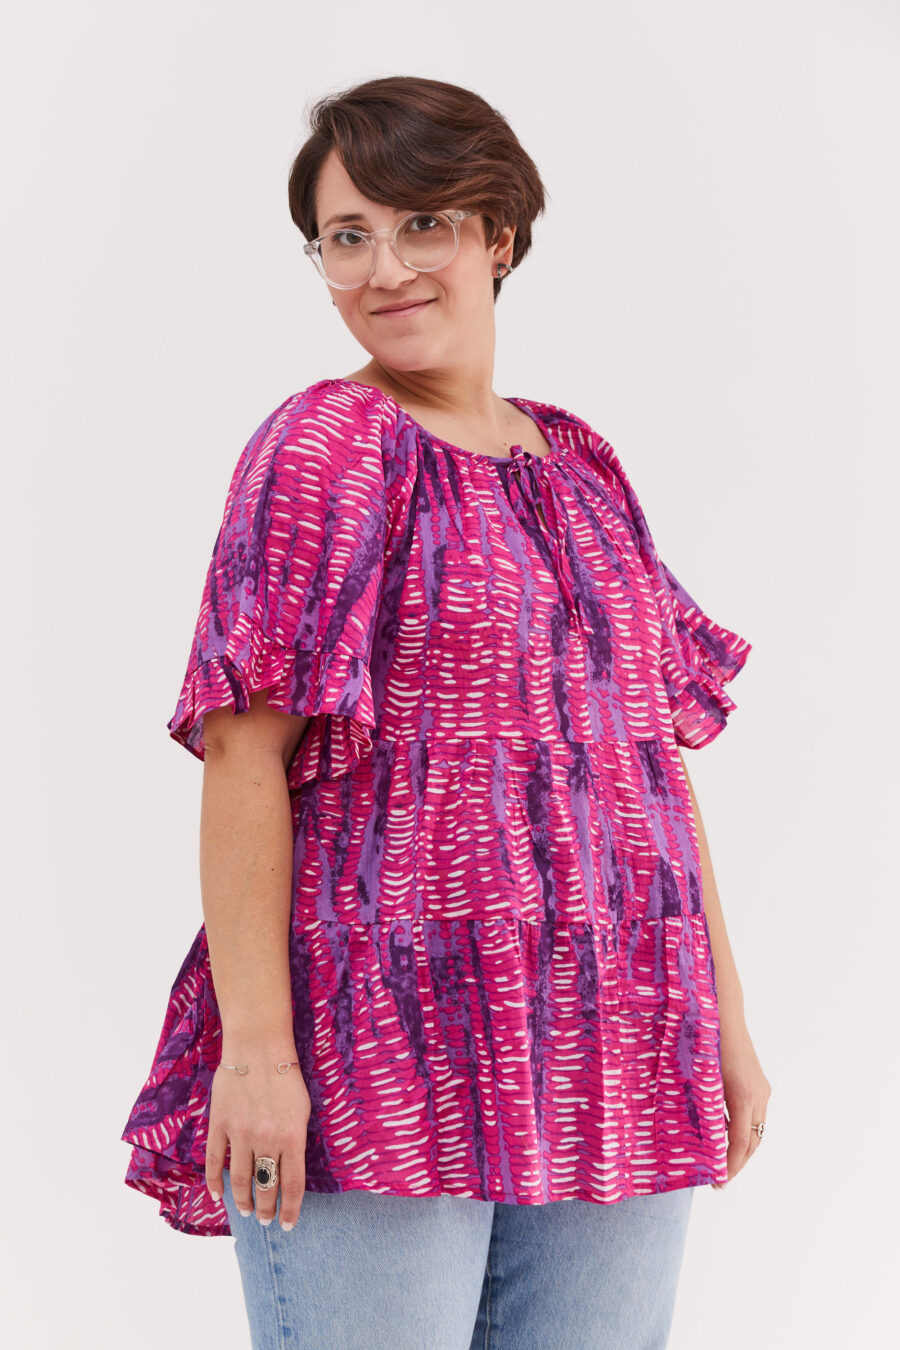 Happy tunic | Oversized flattering tunic – Stone violet print, pink tunic with violet stone-like print by comfort zone boutique